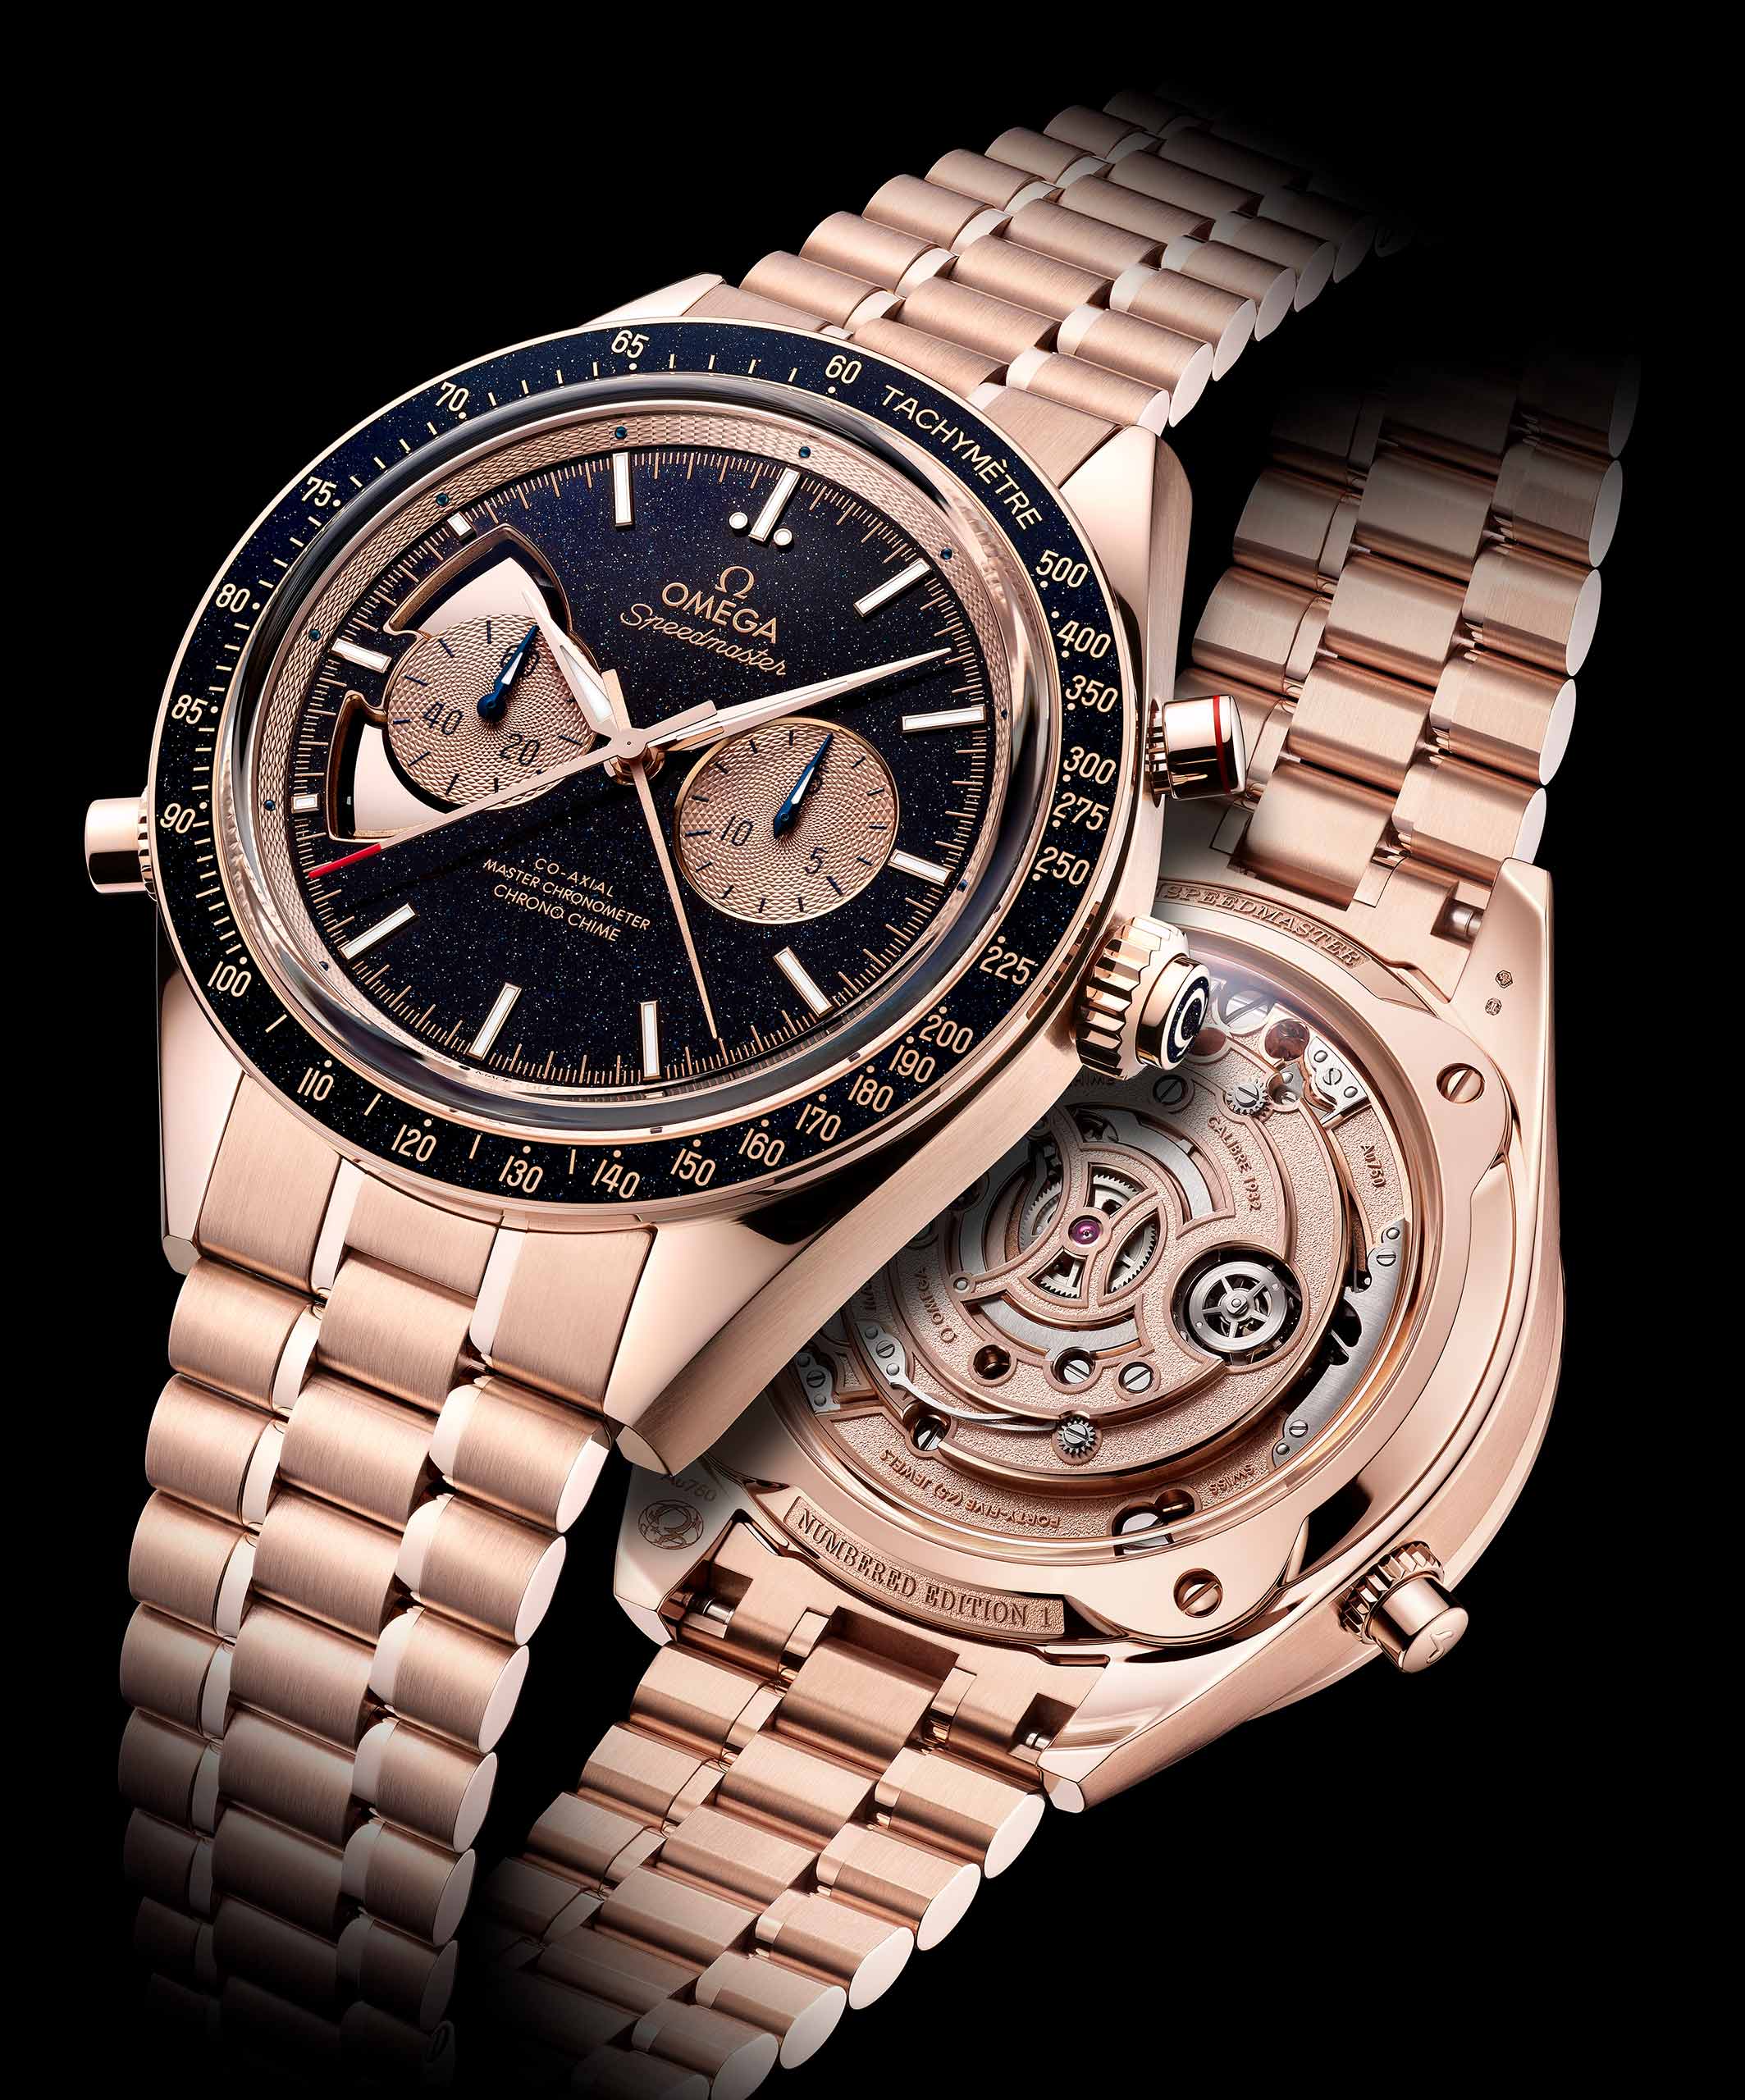 The Speedmaster Chrono Chime is Here, and it’s the Most Complicated Watch Omega Has Ever Made